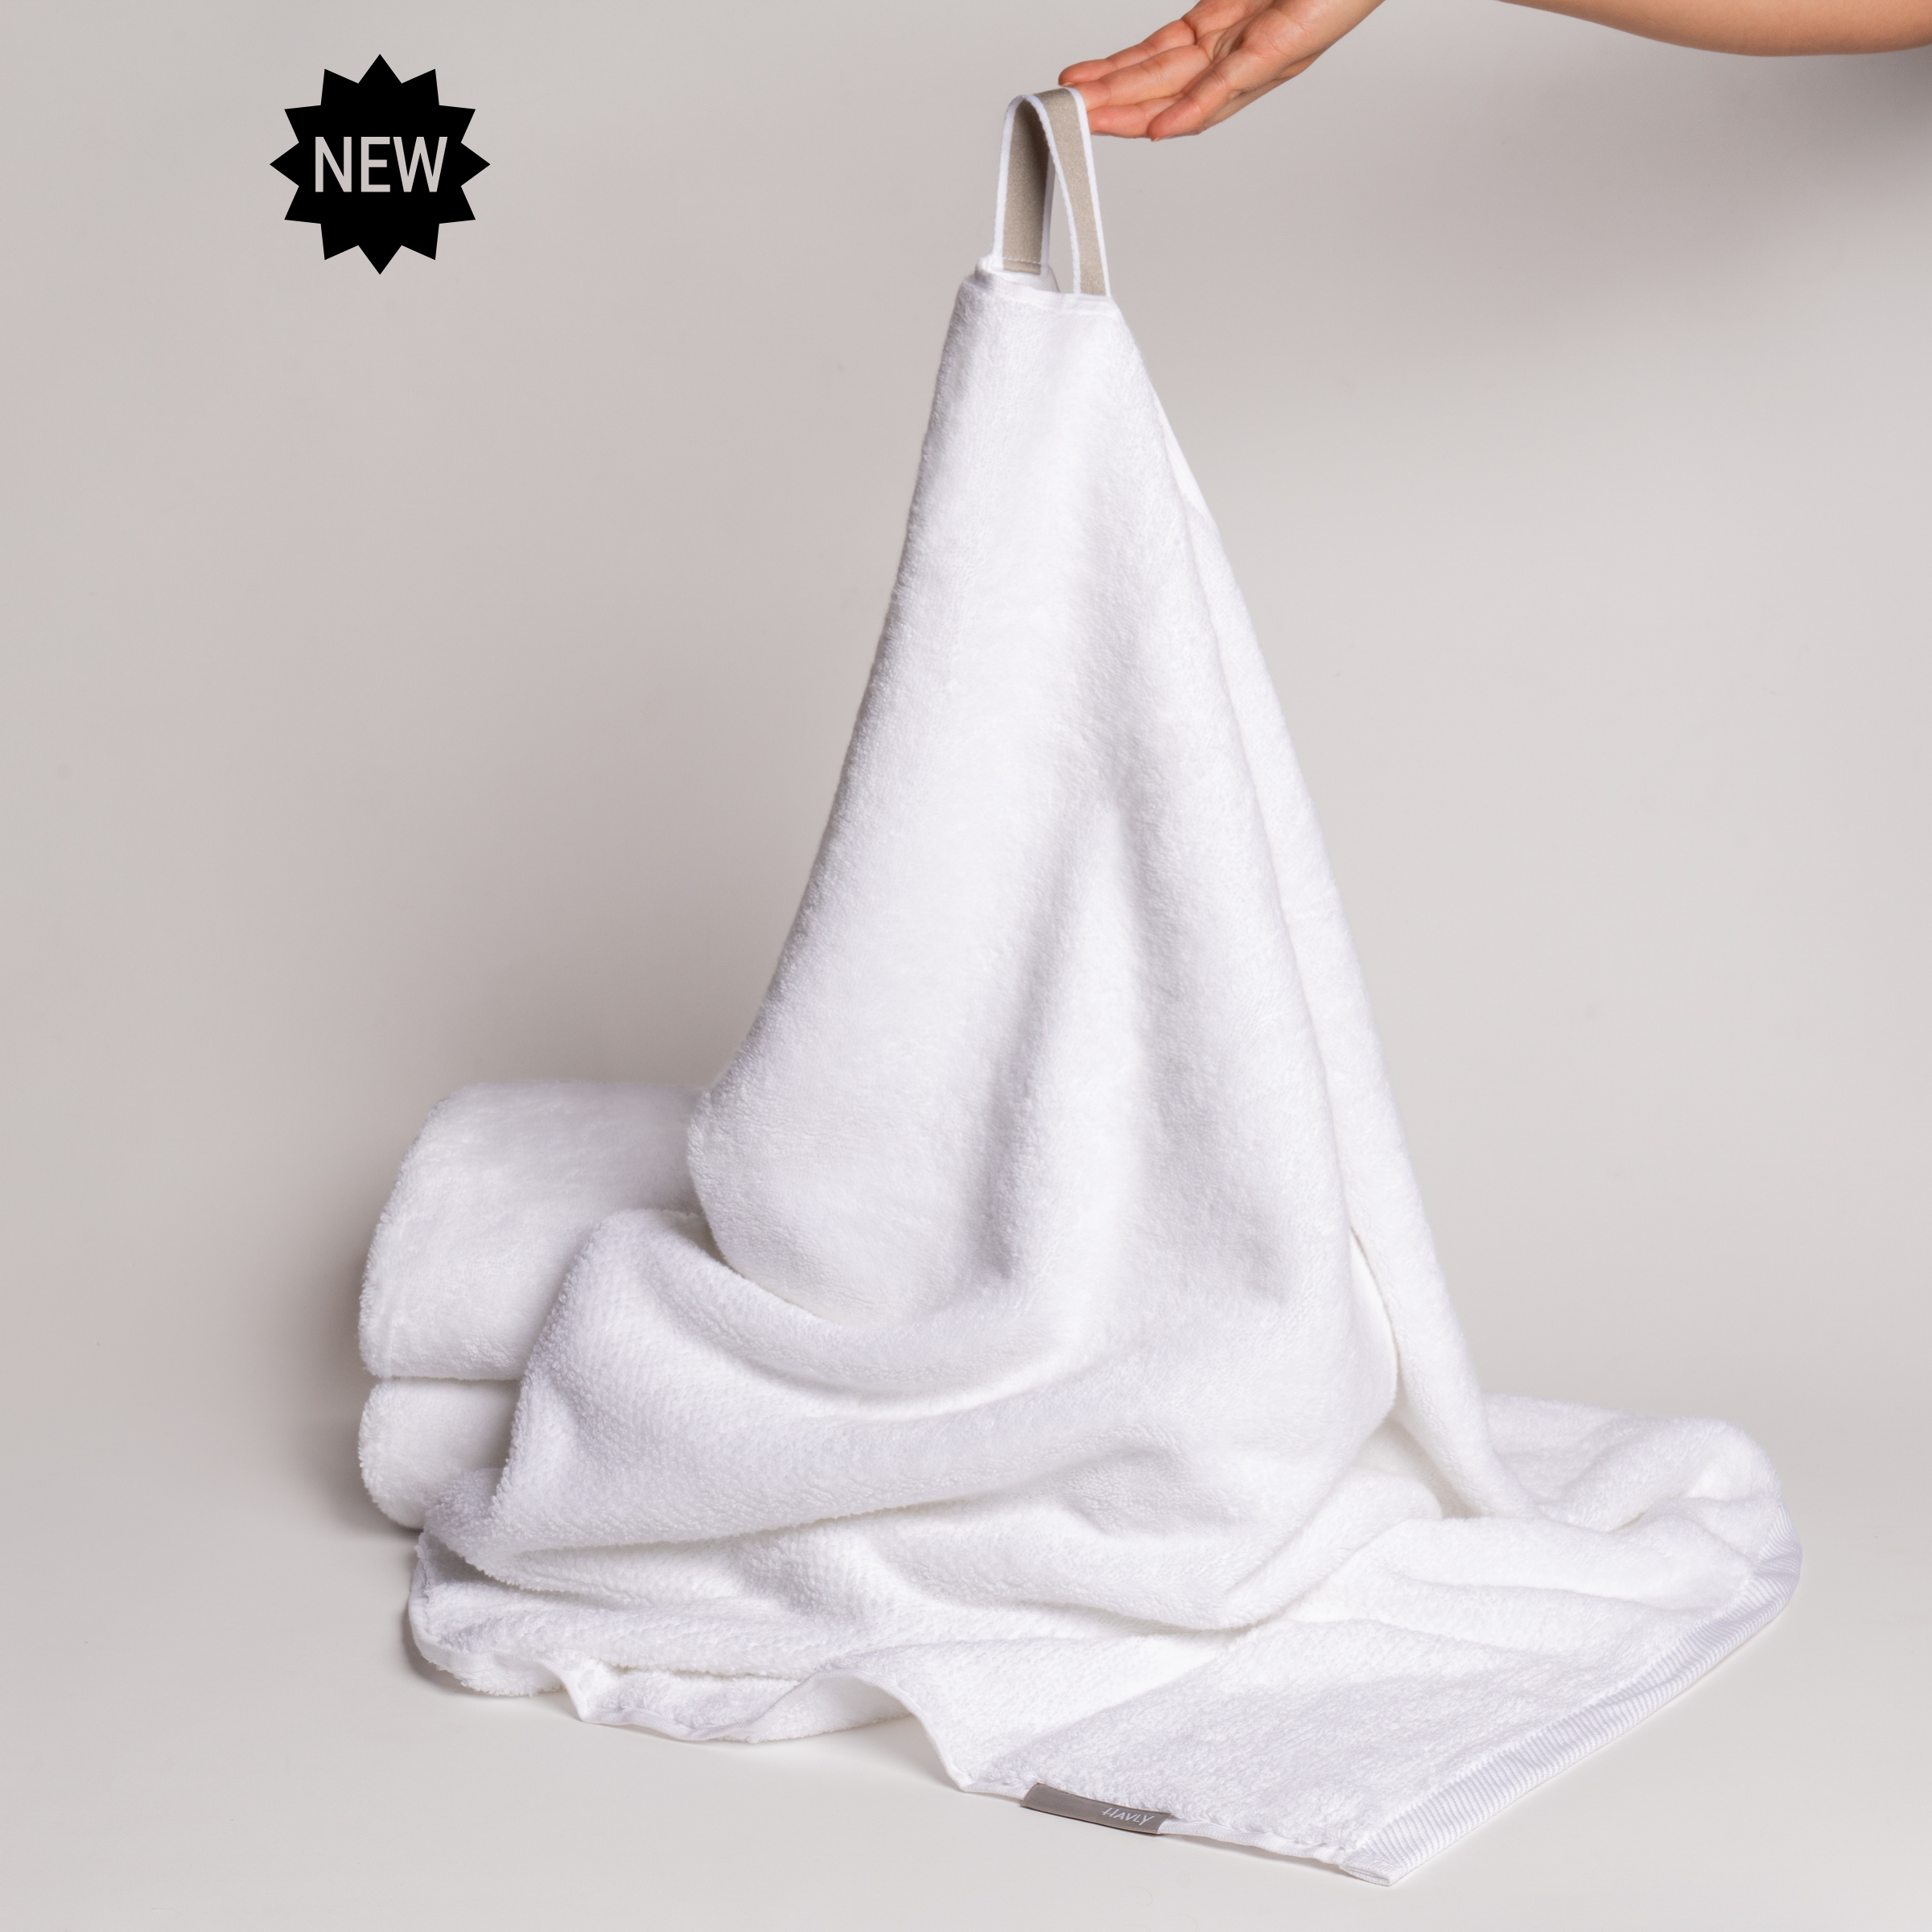 Havly | The Classic Bath Towel in Dune